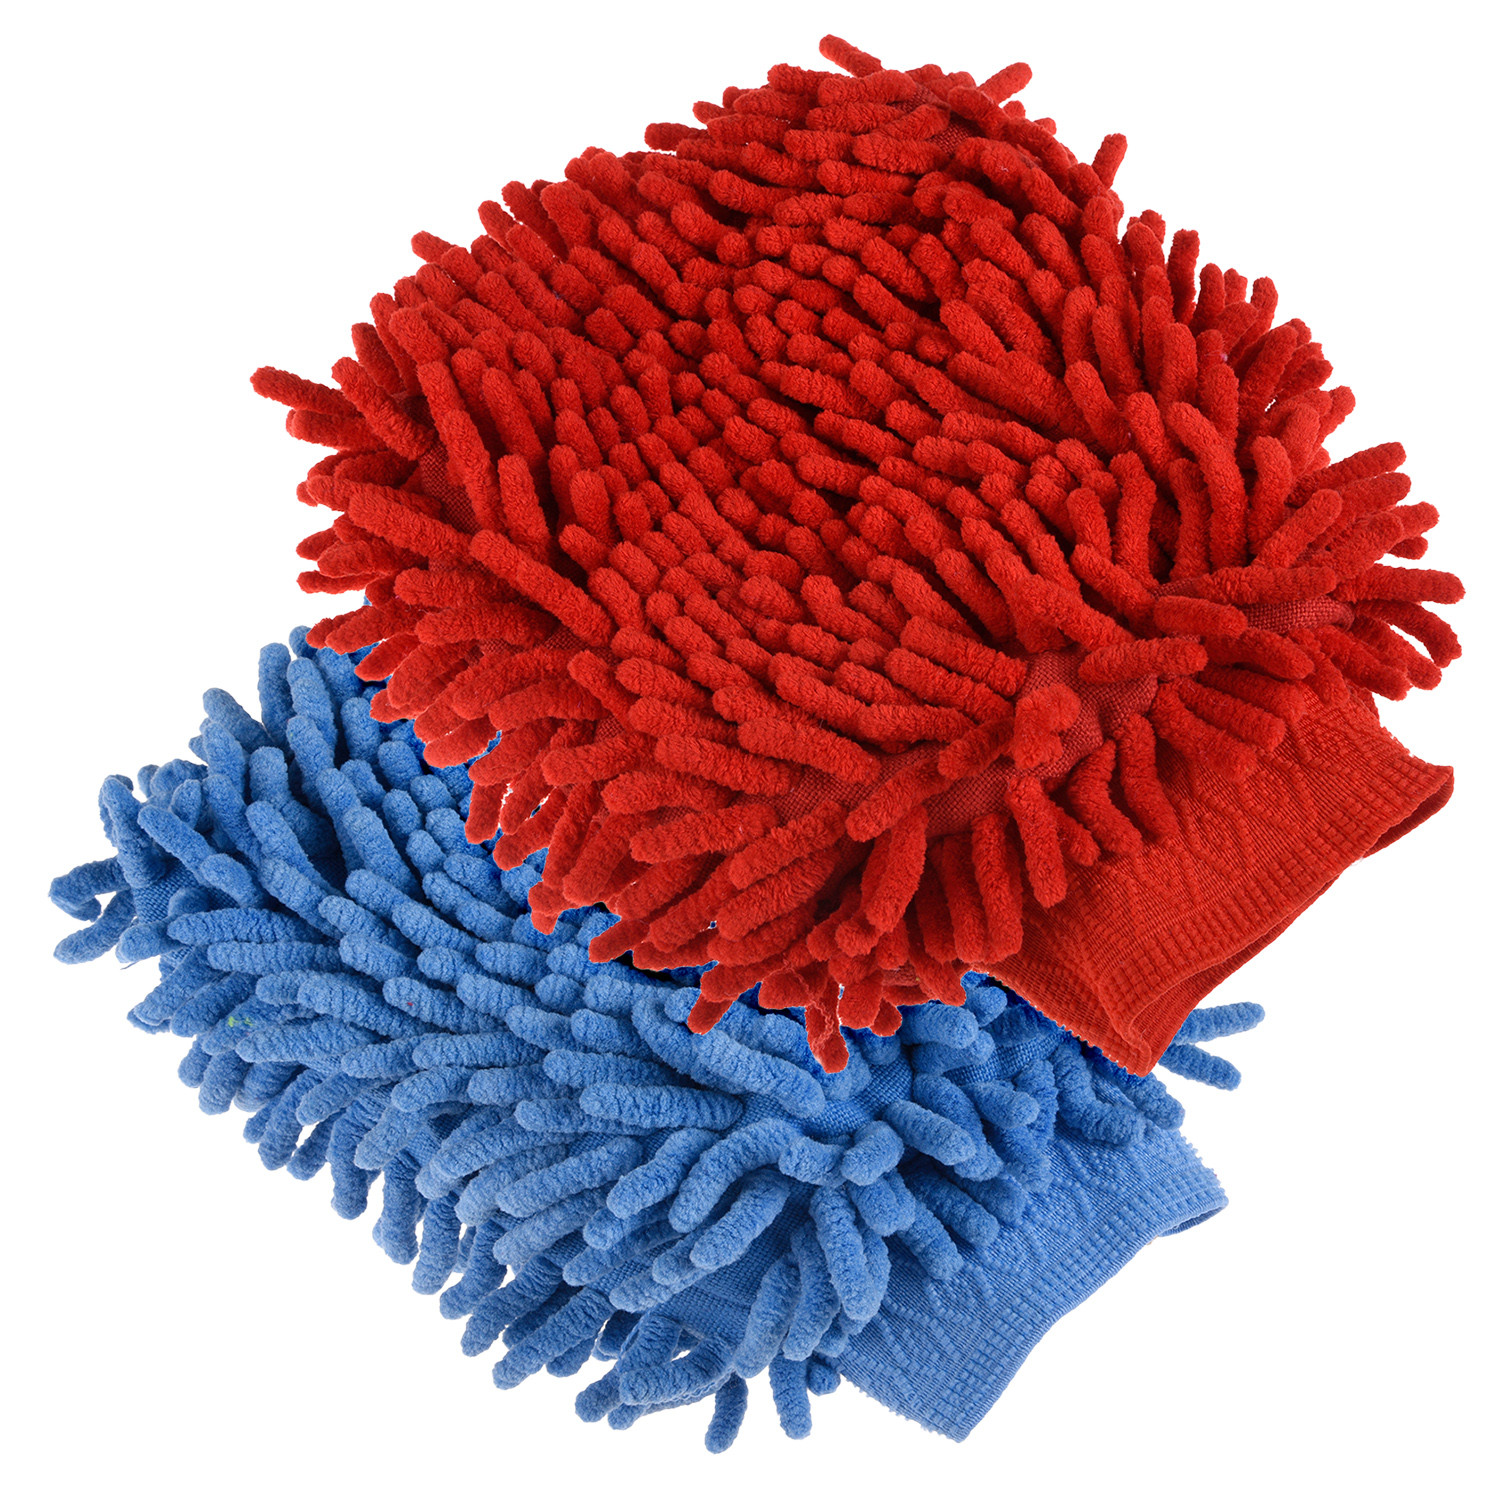 Kuber Industries Chenille Mitts|Microfiber Cleaning Gloves|Inside Waterproof Cloth Gloves|100 Gram Weighted Hand Duster|Chenille Gloves For Car|Glass|Pack of 2 (Red & Blue)